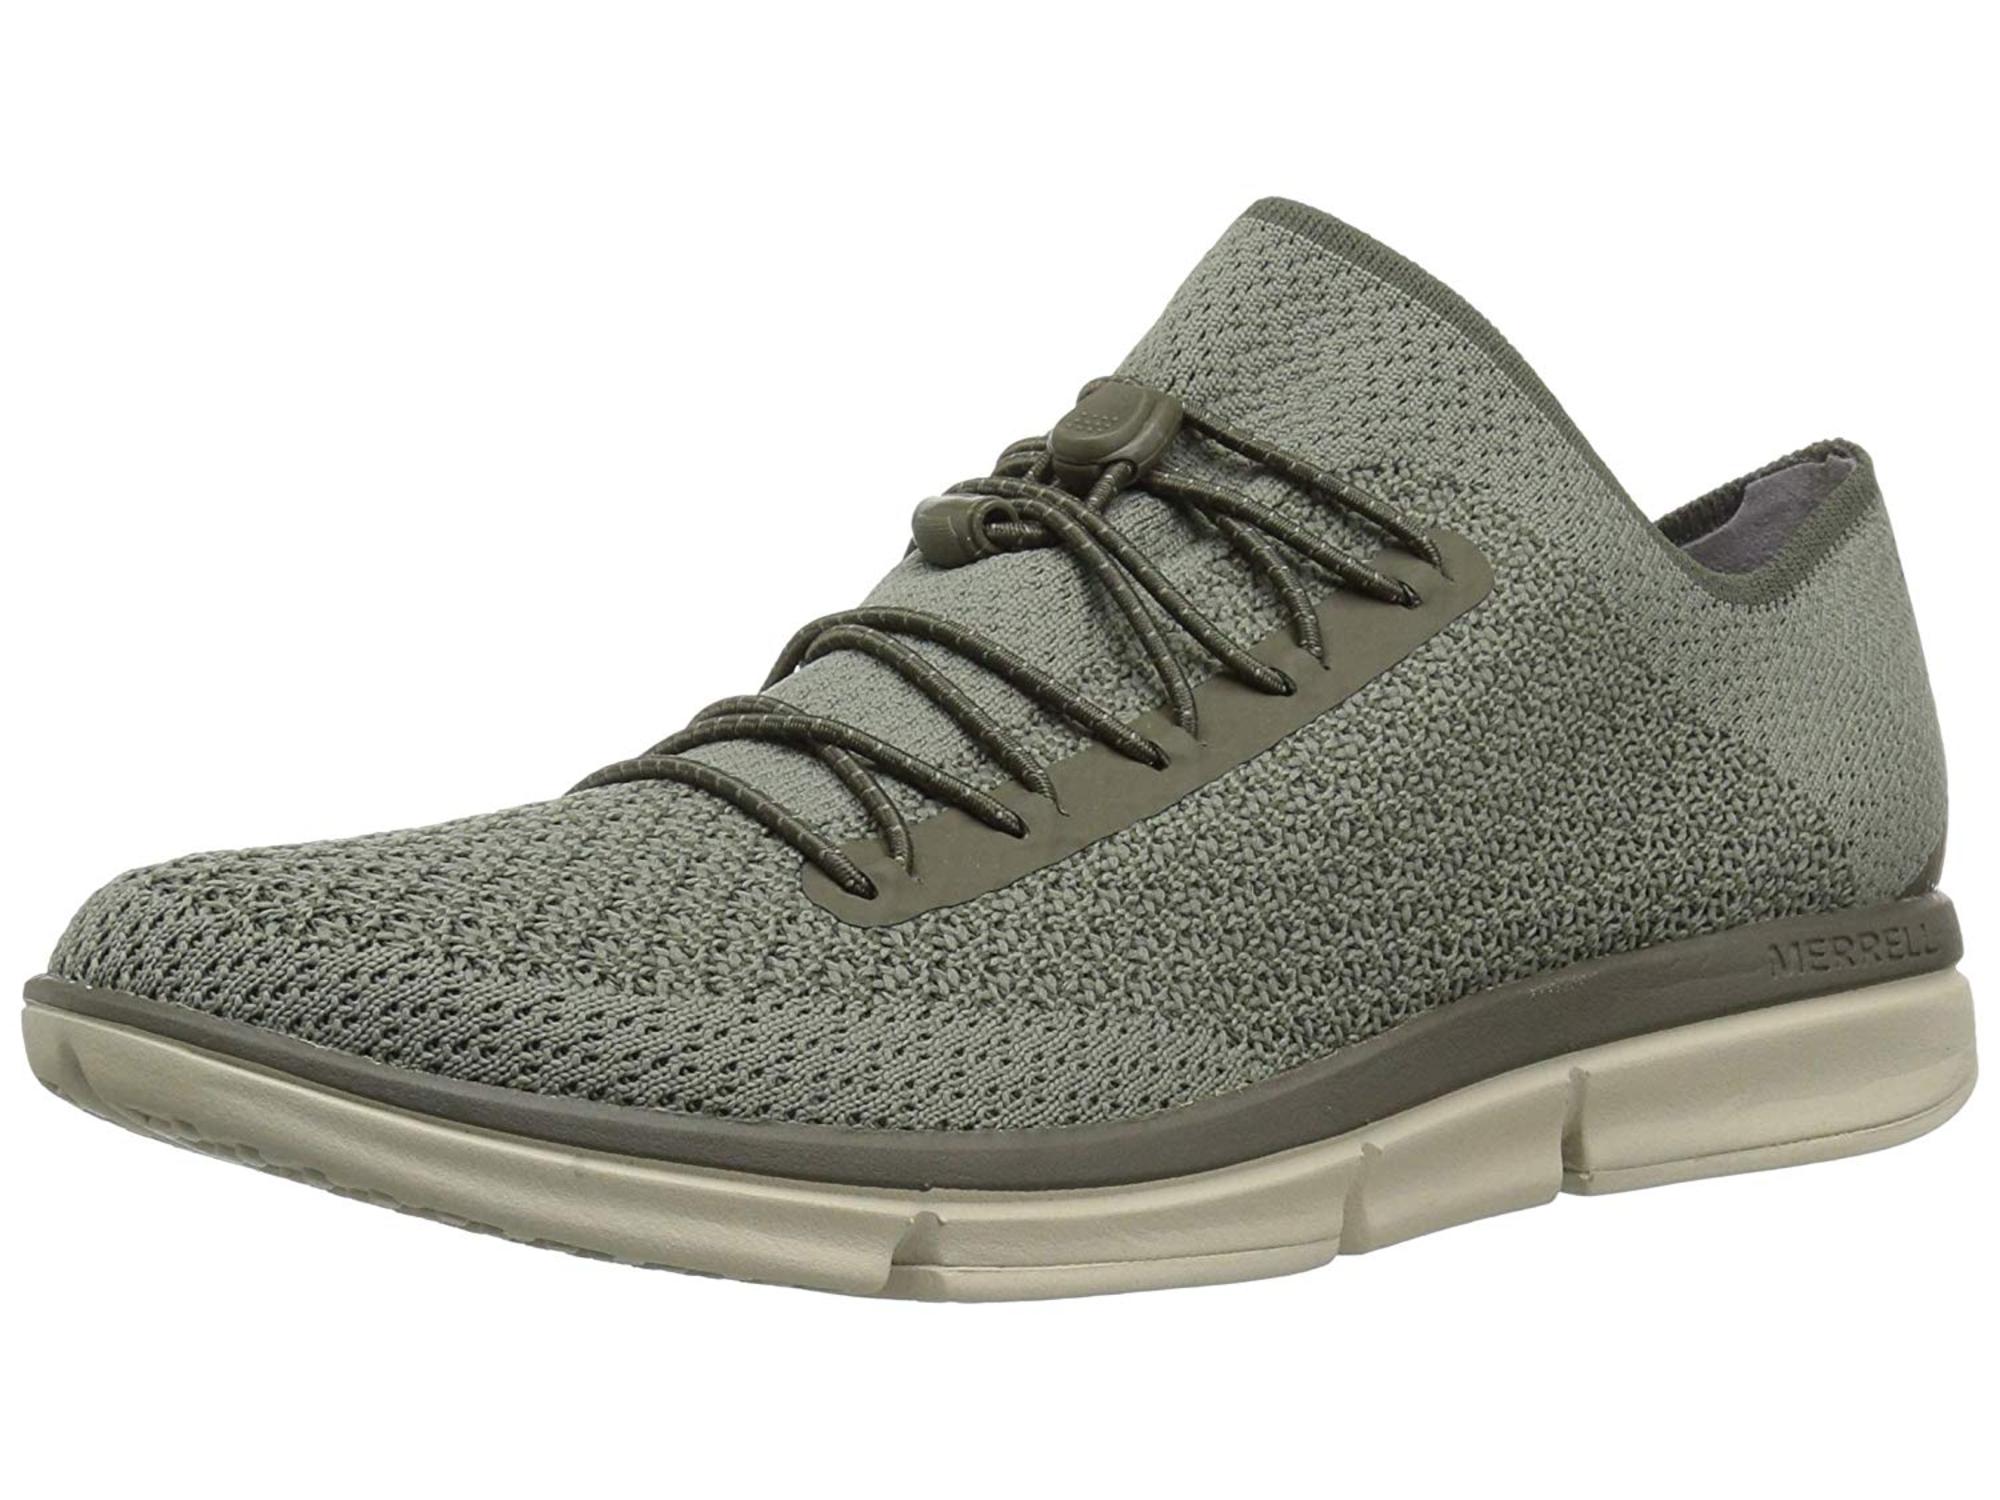 merrell zoe sojourn lace knit q2 sneakers